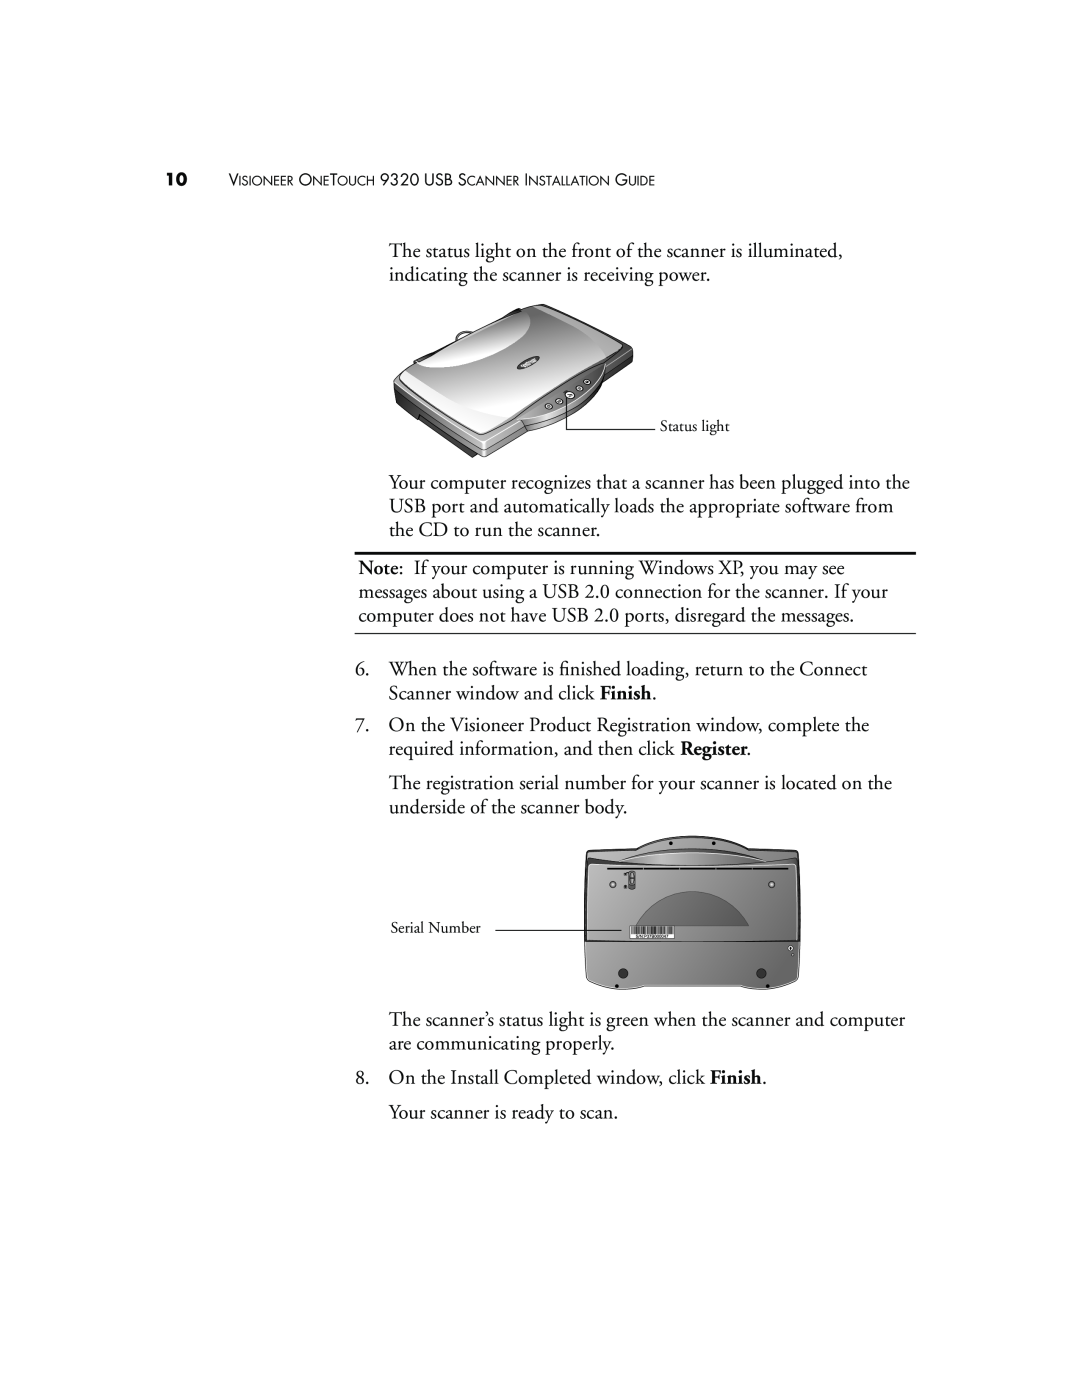 Visioneer manual Status light, Serial Number, VISIONEER ONETOUCH 9320 USB SCANNER INSTALLATION GUIDE 